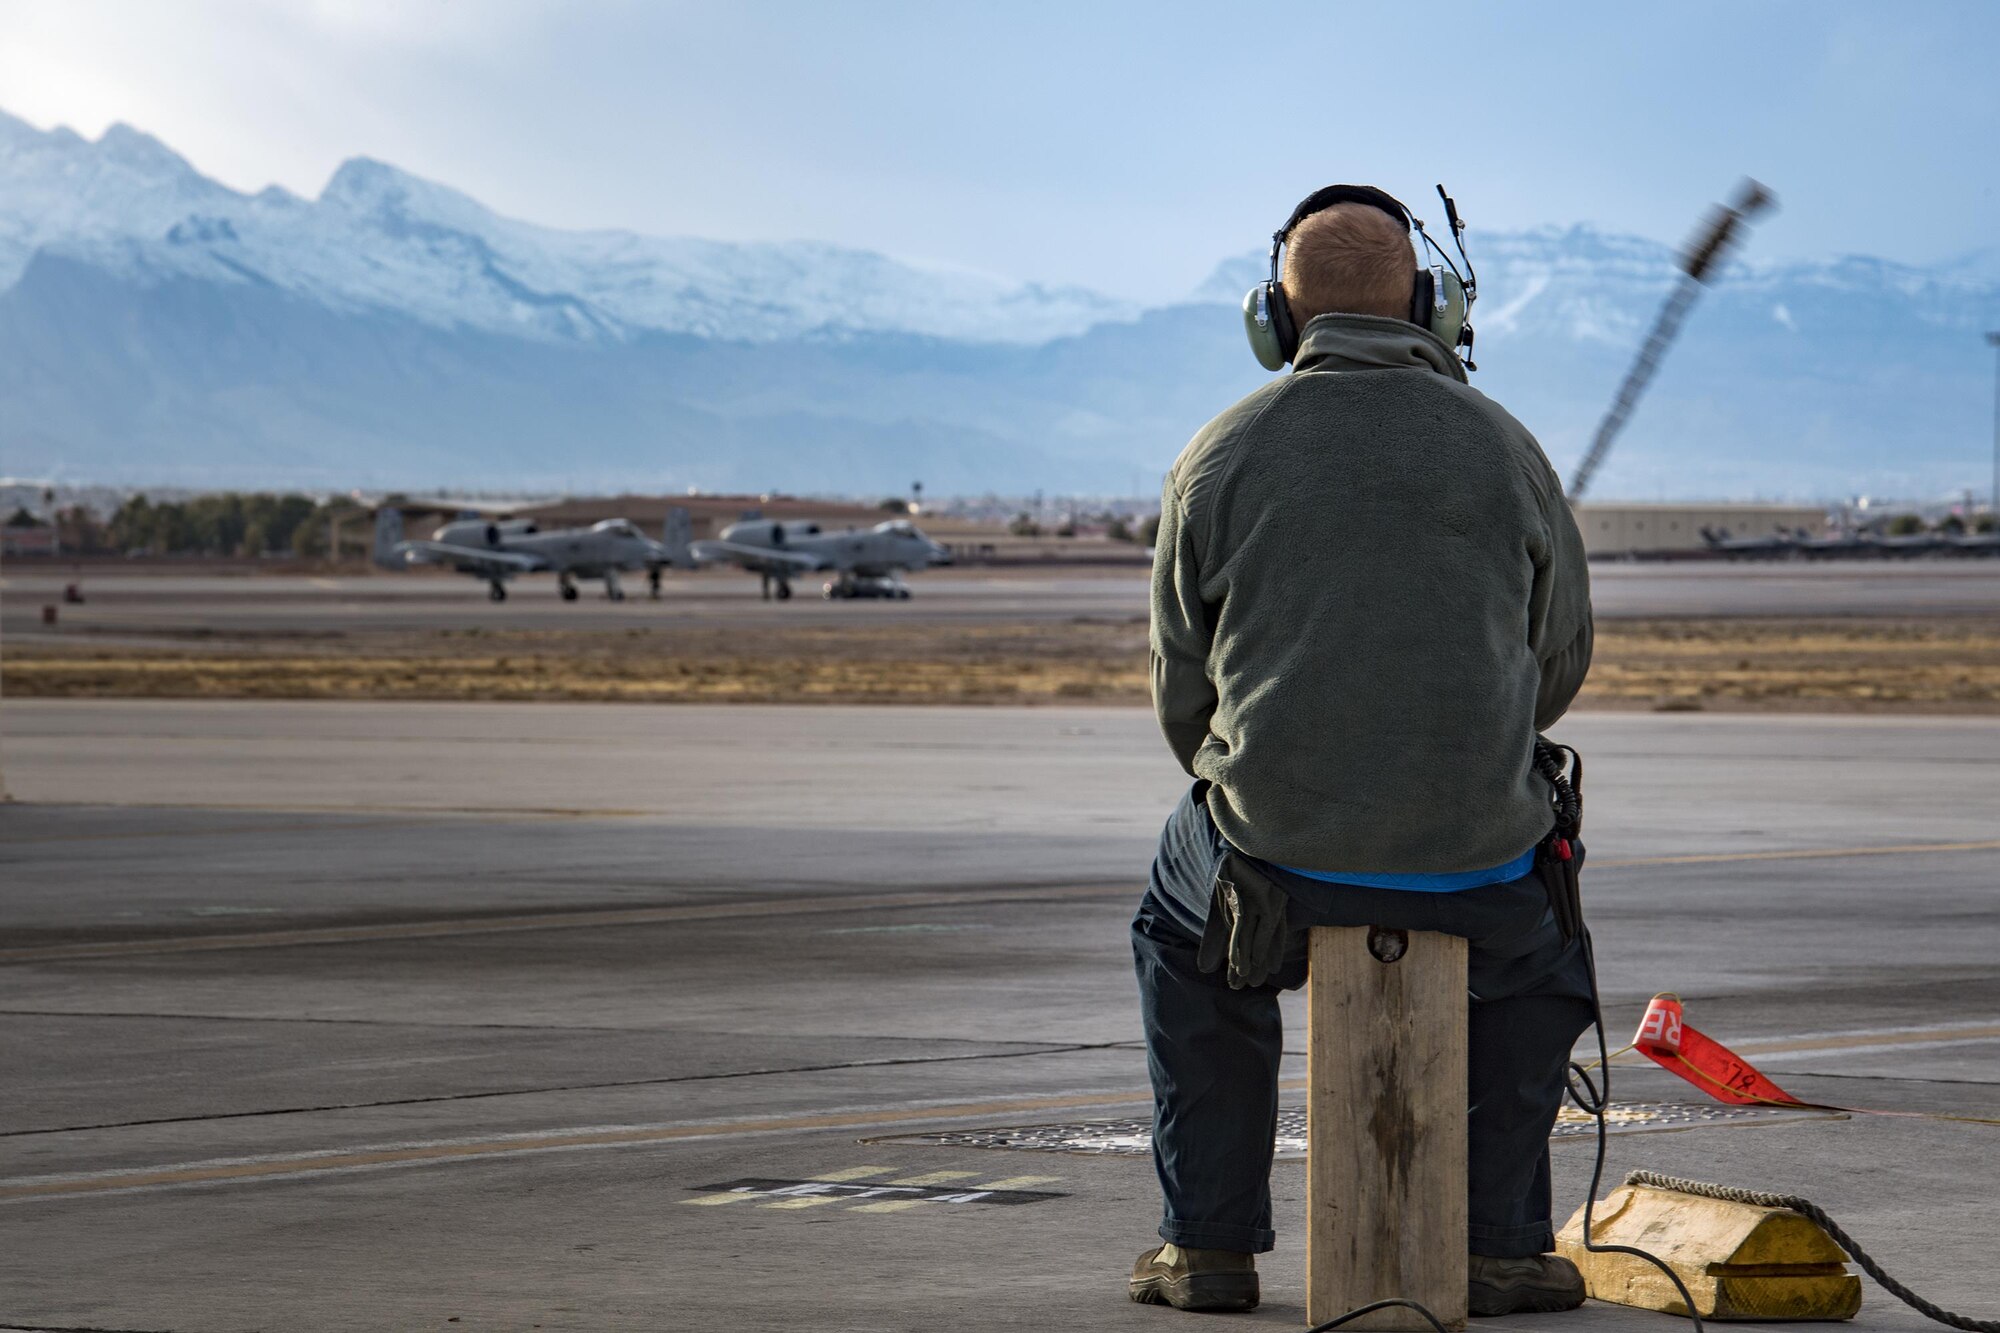 Senior Airman Cody Campbell, 74th Aircraft Maintenance Unit crew chief, swings the rope on a tire-chalk while waiting for an A-10C Thunderbolt II to return from the end of the runway during Green Flag-West 17-03, Jan. 23, 2017, at Nellis Air Force Base, Nev. GFW is an air-land integration combat training exercise, which hosted 12 A-10s from Moody Air Force Base, Ga. Accompanying the aircraft were 130 maintenance personnel who worked around the clock to launch 18 sorties per day. (U.S. Air Force photo by Staff Sgt. Ryan Callaghan)